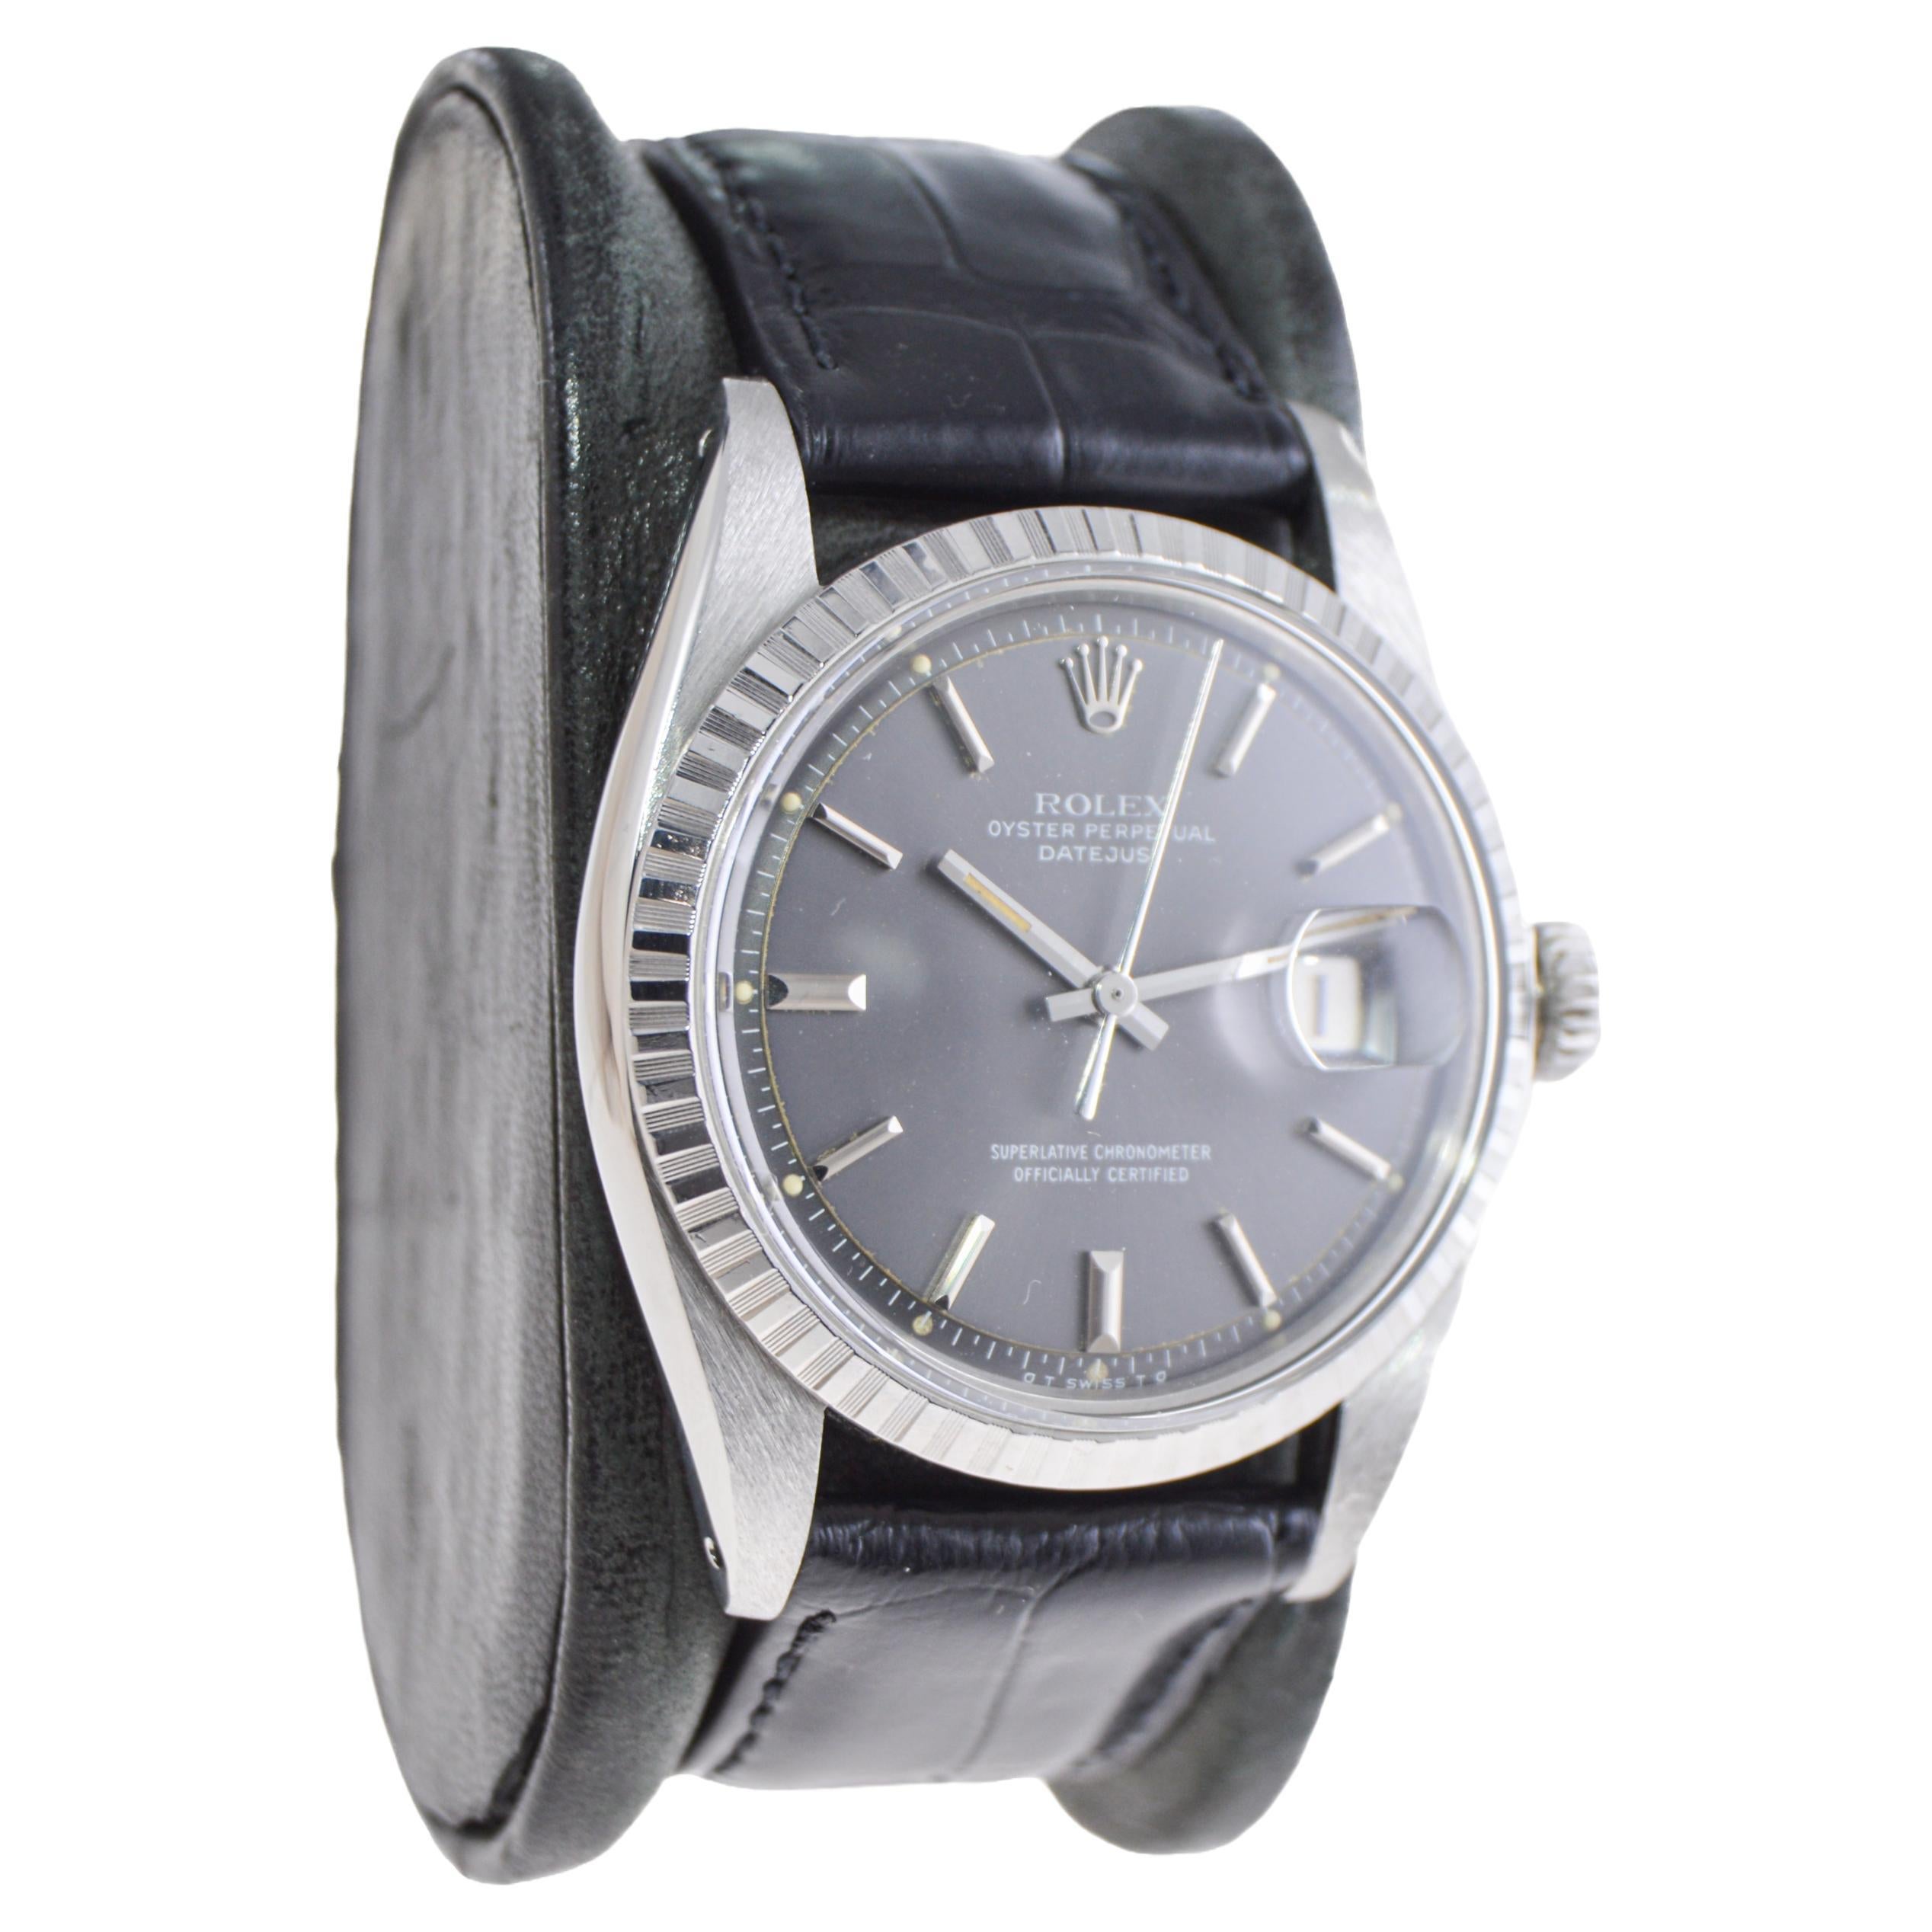 FACTORY / HOUSE: Rolex Watch Company
STYLE / REFERENCE: Oyster Perpetual Datejust / Reference 1601
METAL / MATERIAL: Stainless Steel
CIRCA / YEAR: 1960's
DIMENSIONS / SIZE: Length 43mm x Diameter 36mm
MOVEMENT / CALIBER: Perpetual Winding / 26